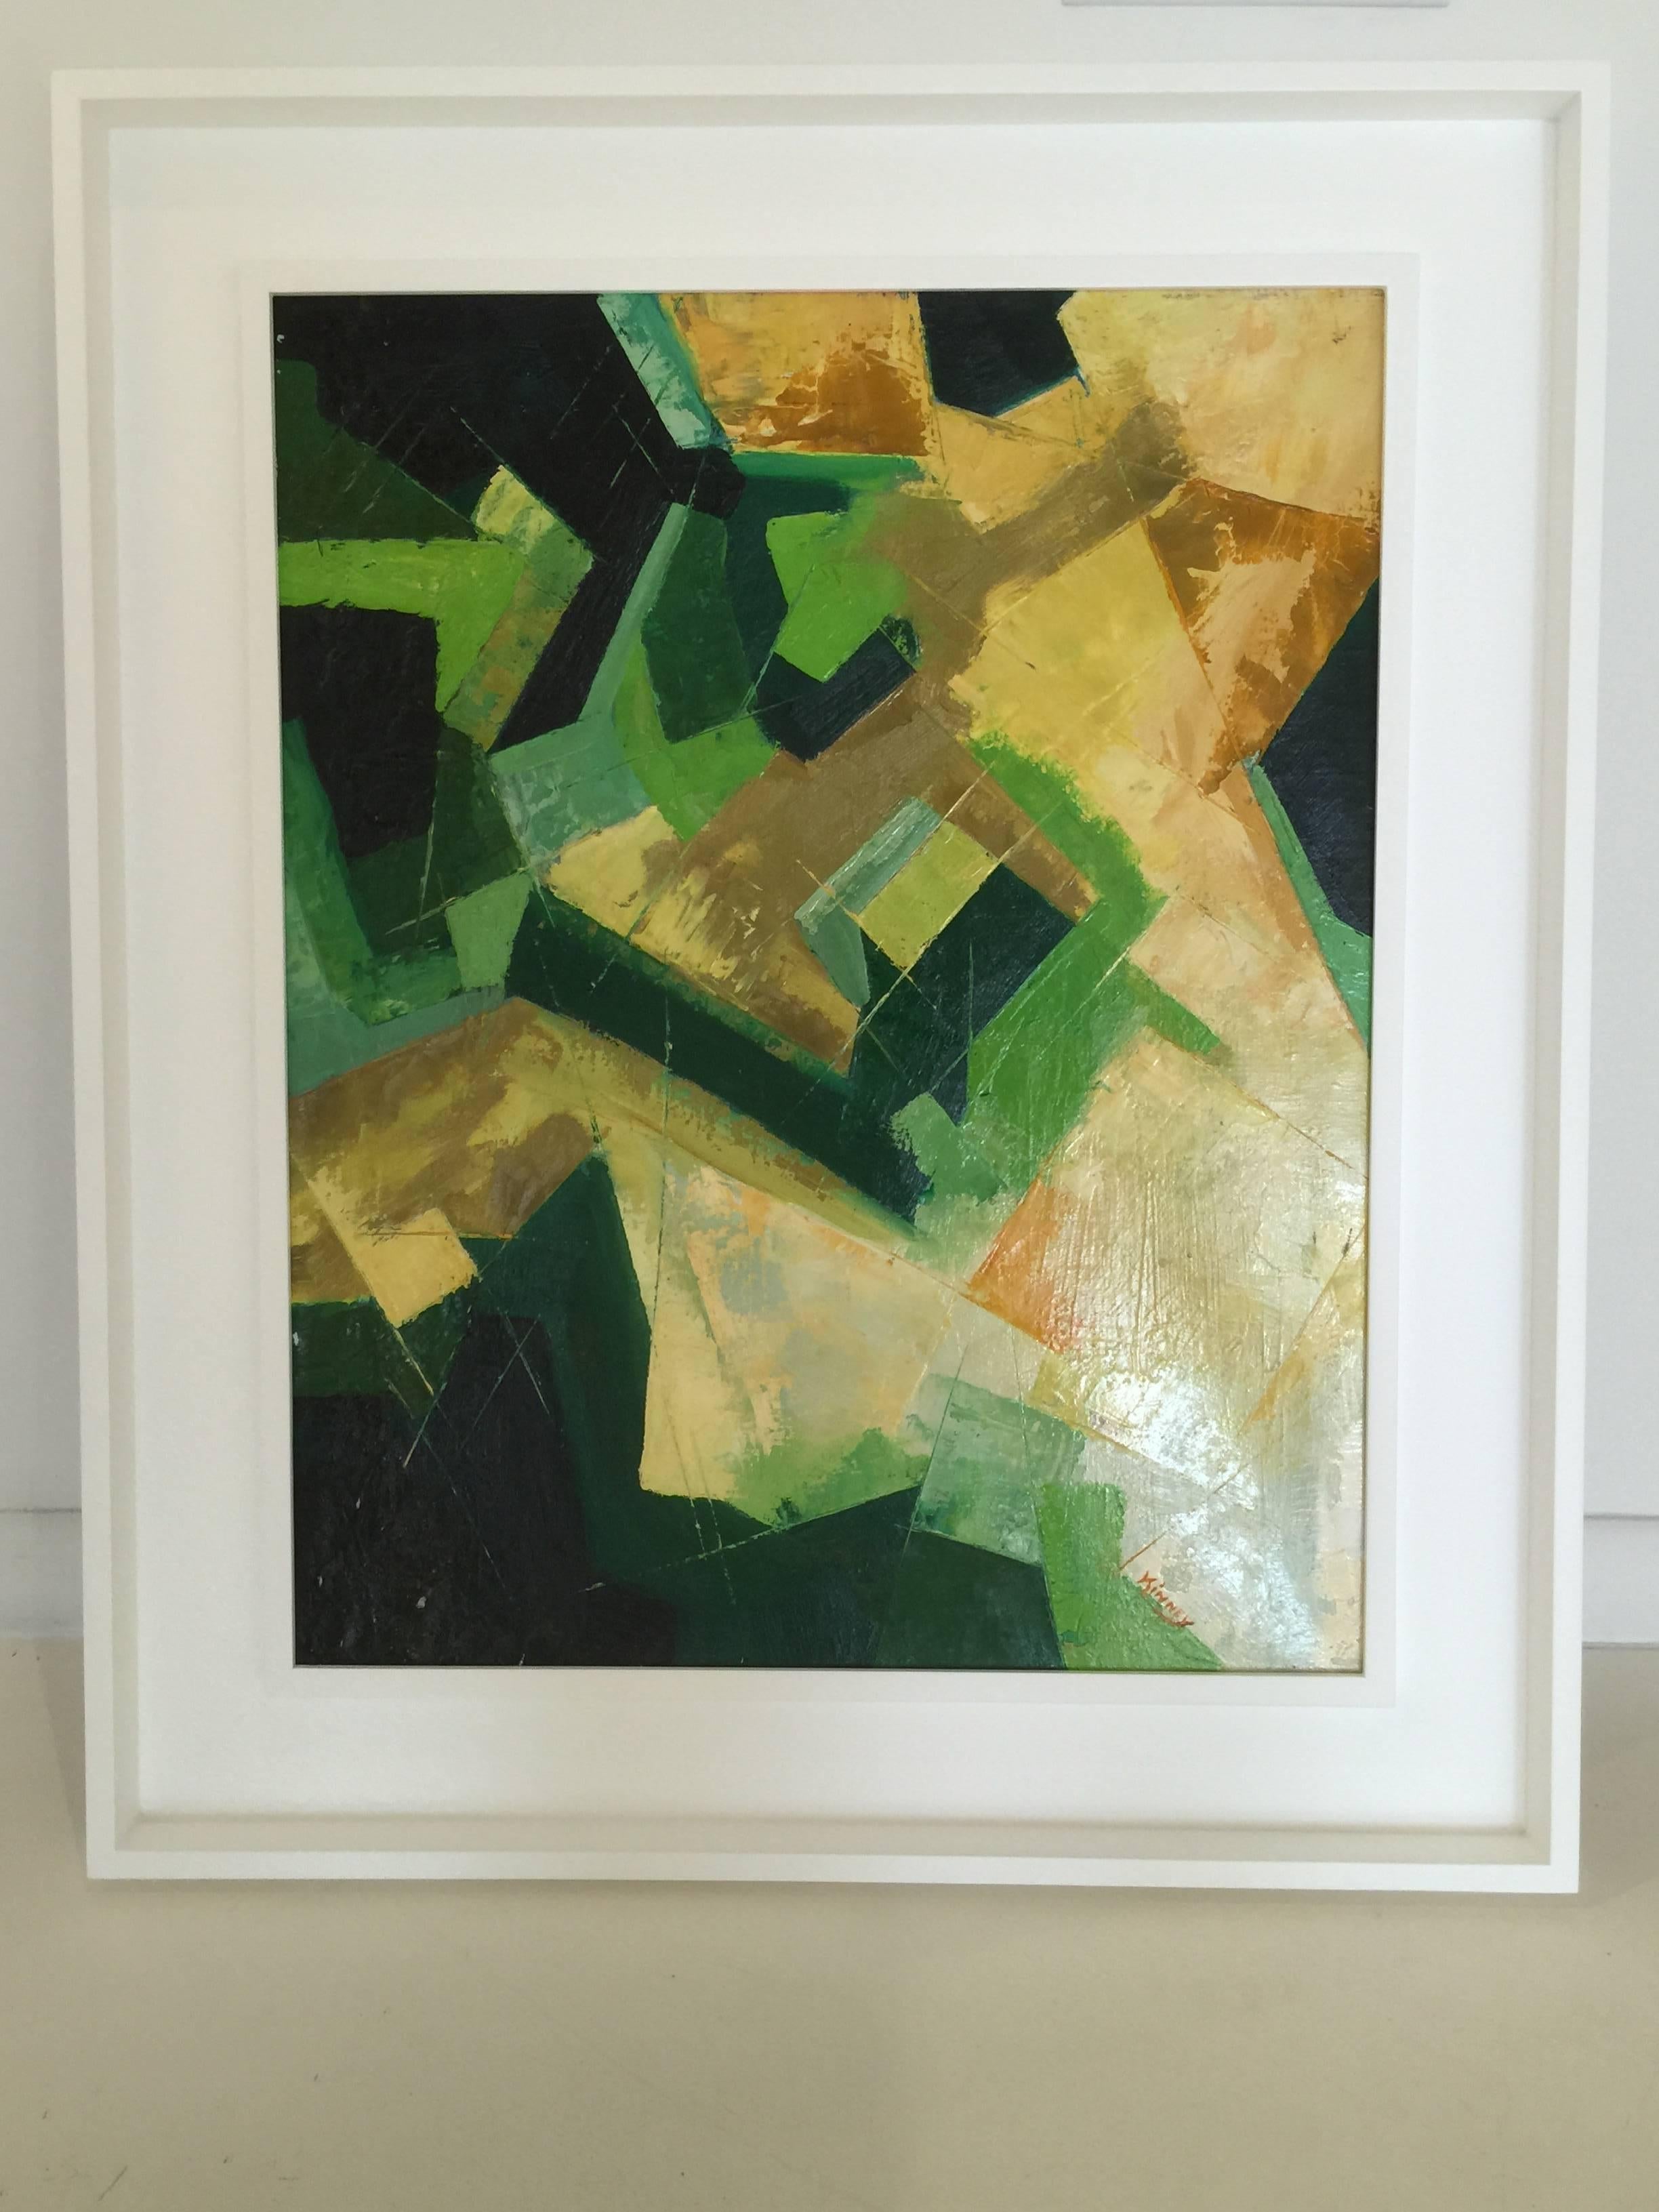 A beautiful cubic abstract in rich greens and yellows of all tones. Gallery framing.